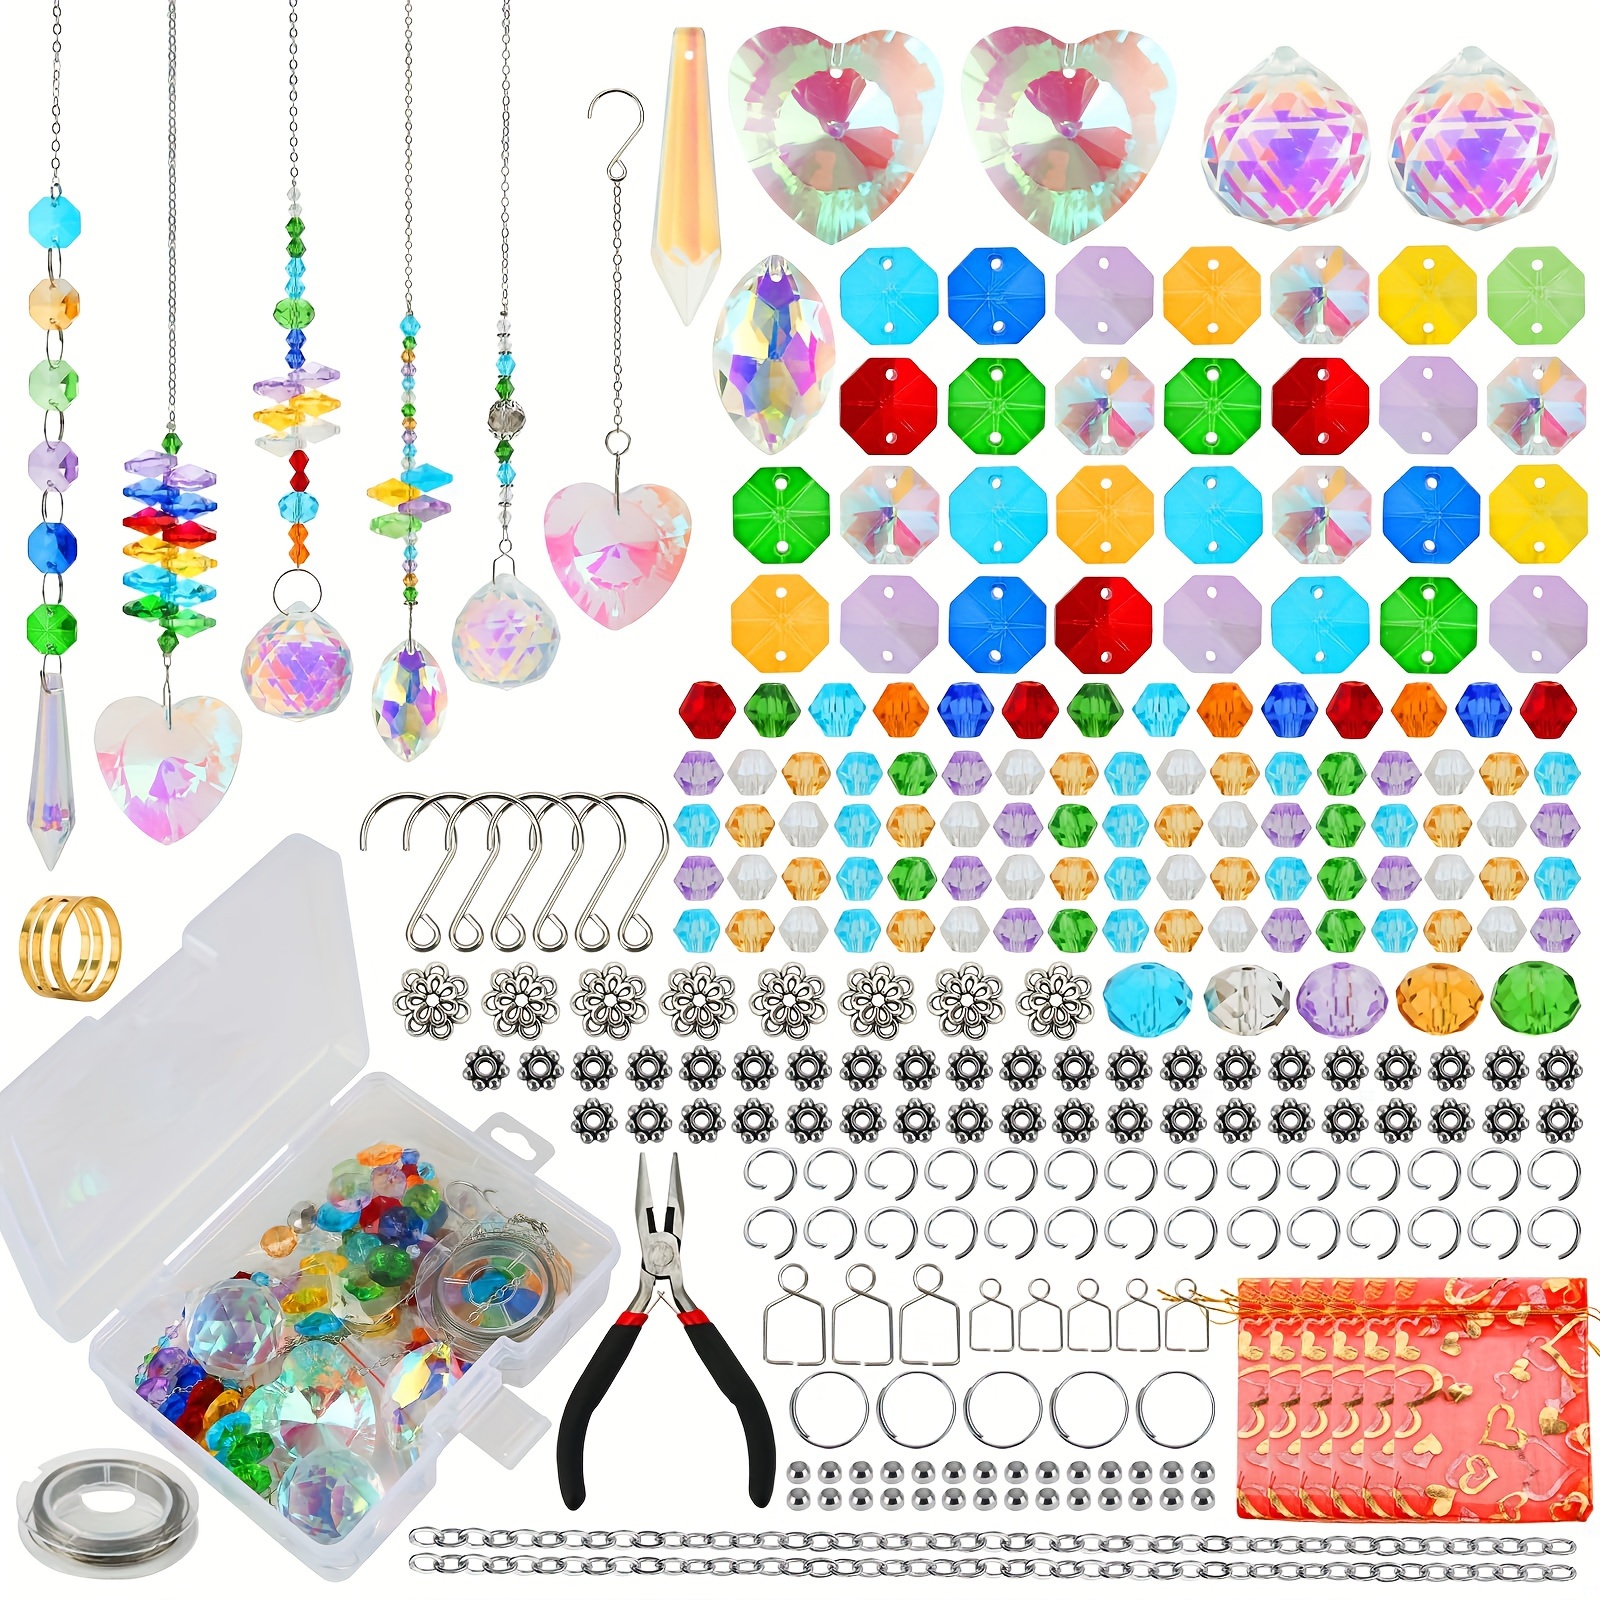 

460 Pcs Diy Suncatcher Making Kits, Glass Sun Catcher Arts And Crafts Supplies Set With Colorful Glass Beads, Rainbow Maker Prism For Windows Hanging Indoor Outdoor Garden Decoration